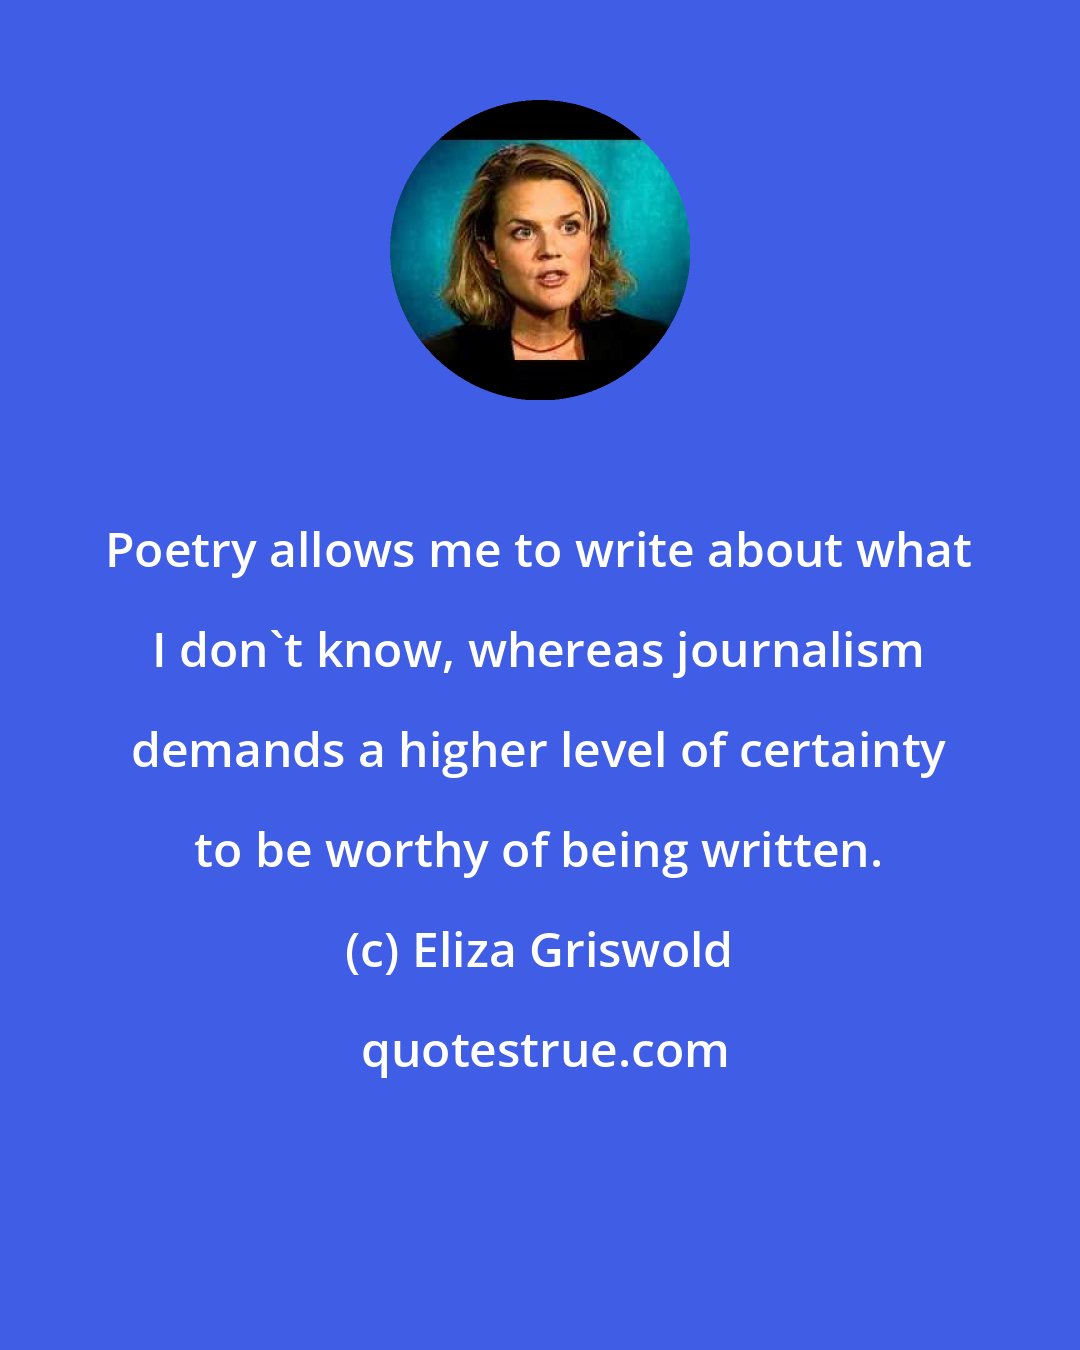 Eliza Griswold: Poetry allows me to write about what I don't know, whereas journalism demands a higher level of certainty to be worthy of being written.